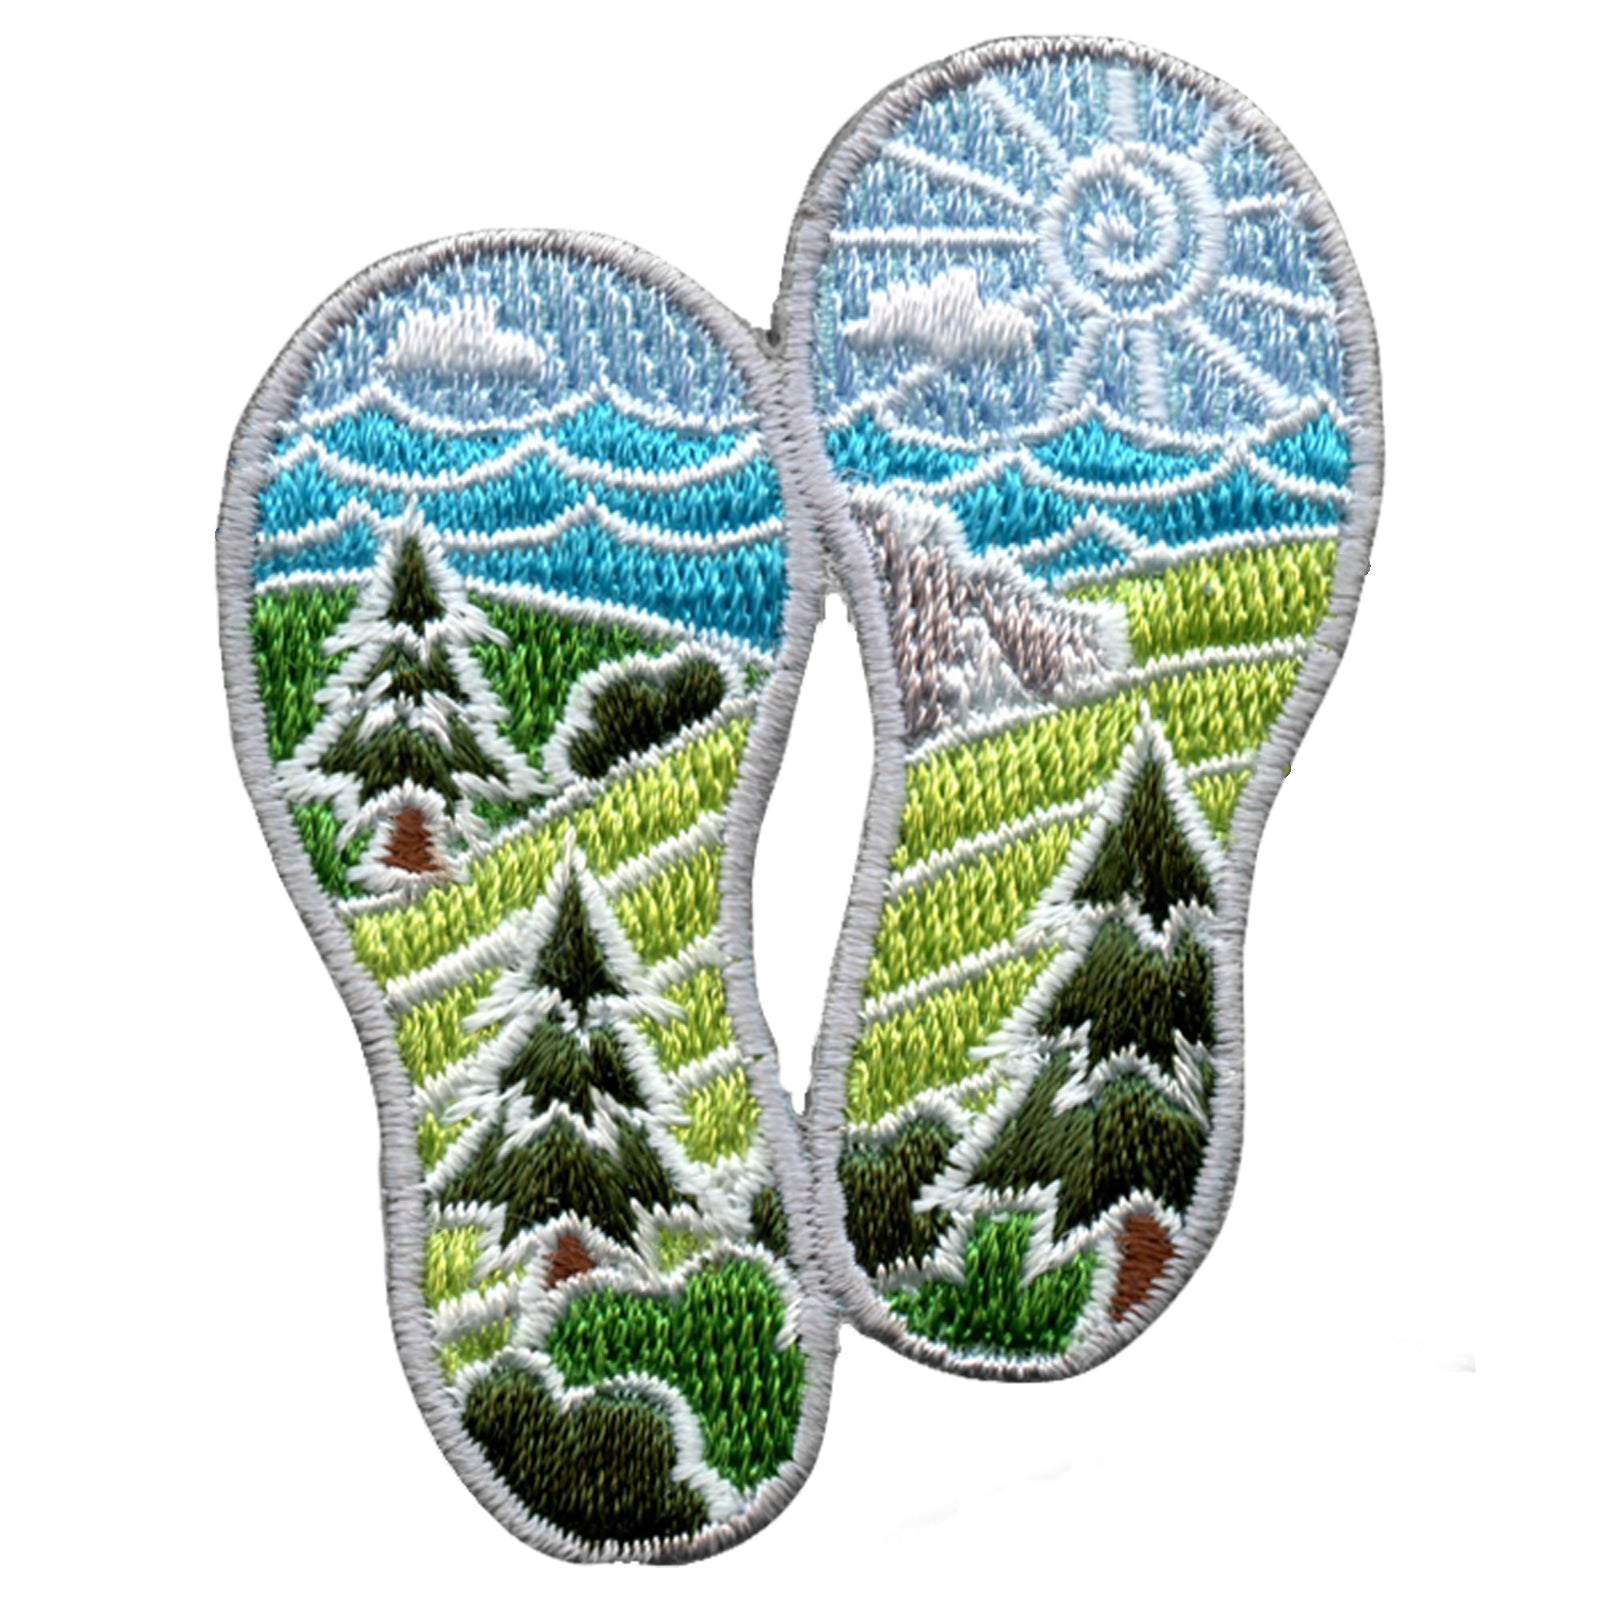 Explore Nature Scenery Footprint Embroidered Iron On Patch 